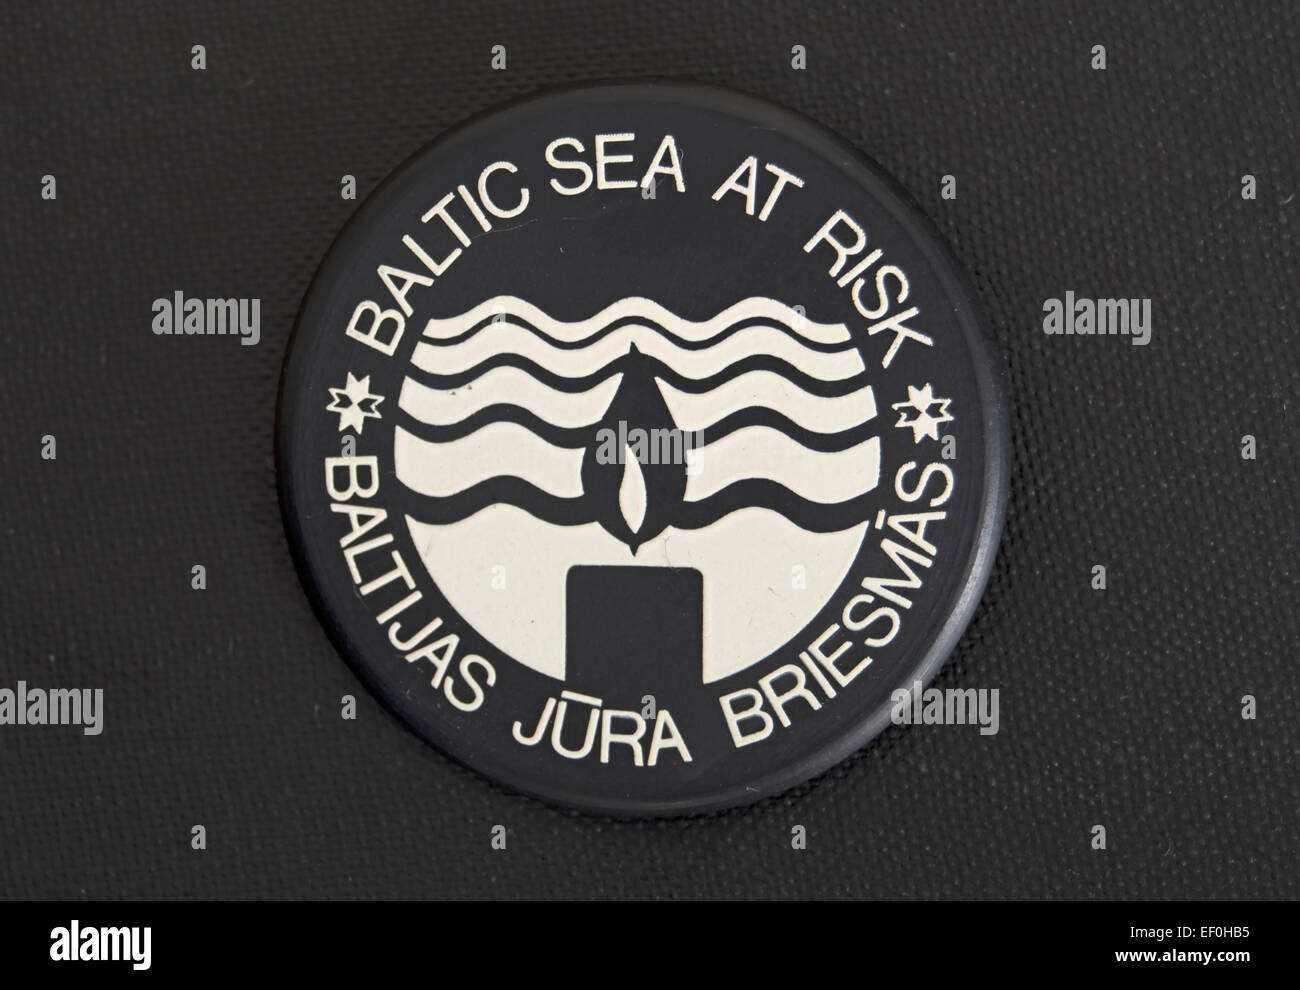 baltic sea at risk badge, with slogan also in latvian (or lettish), part of an environmental campaign of the 1980s Stock Photo